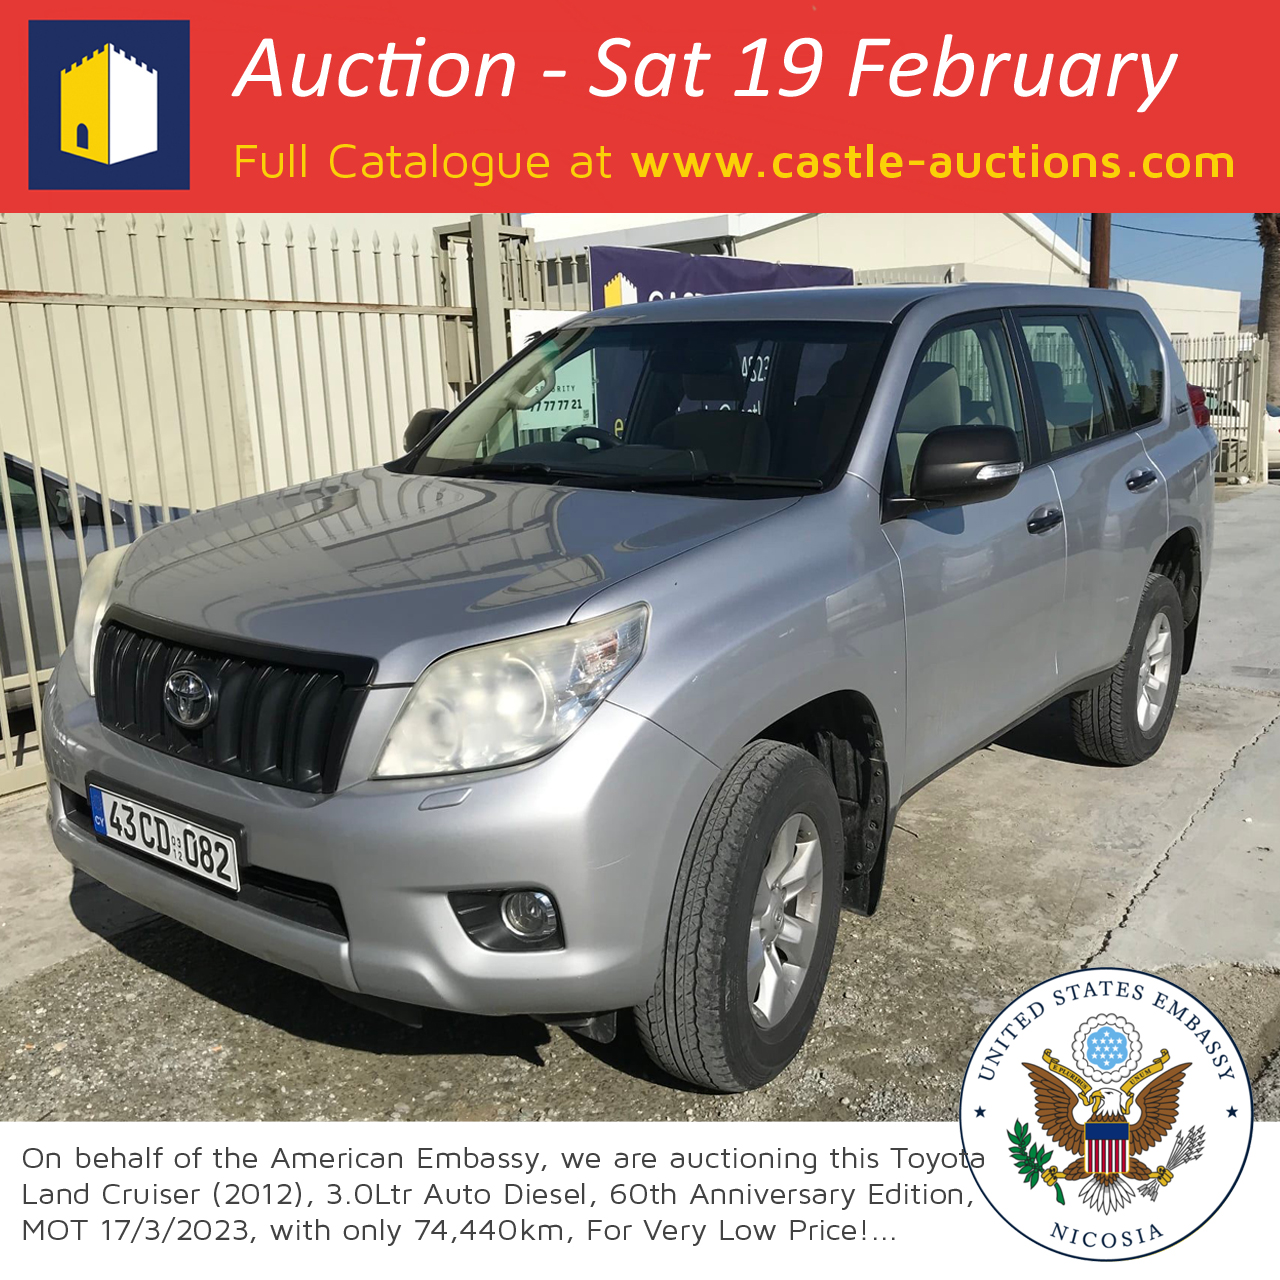 American Embassy Cars For Auction